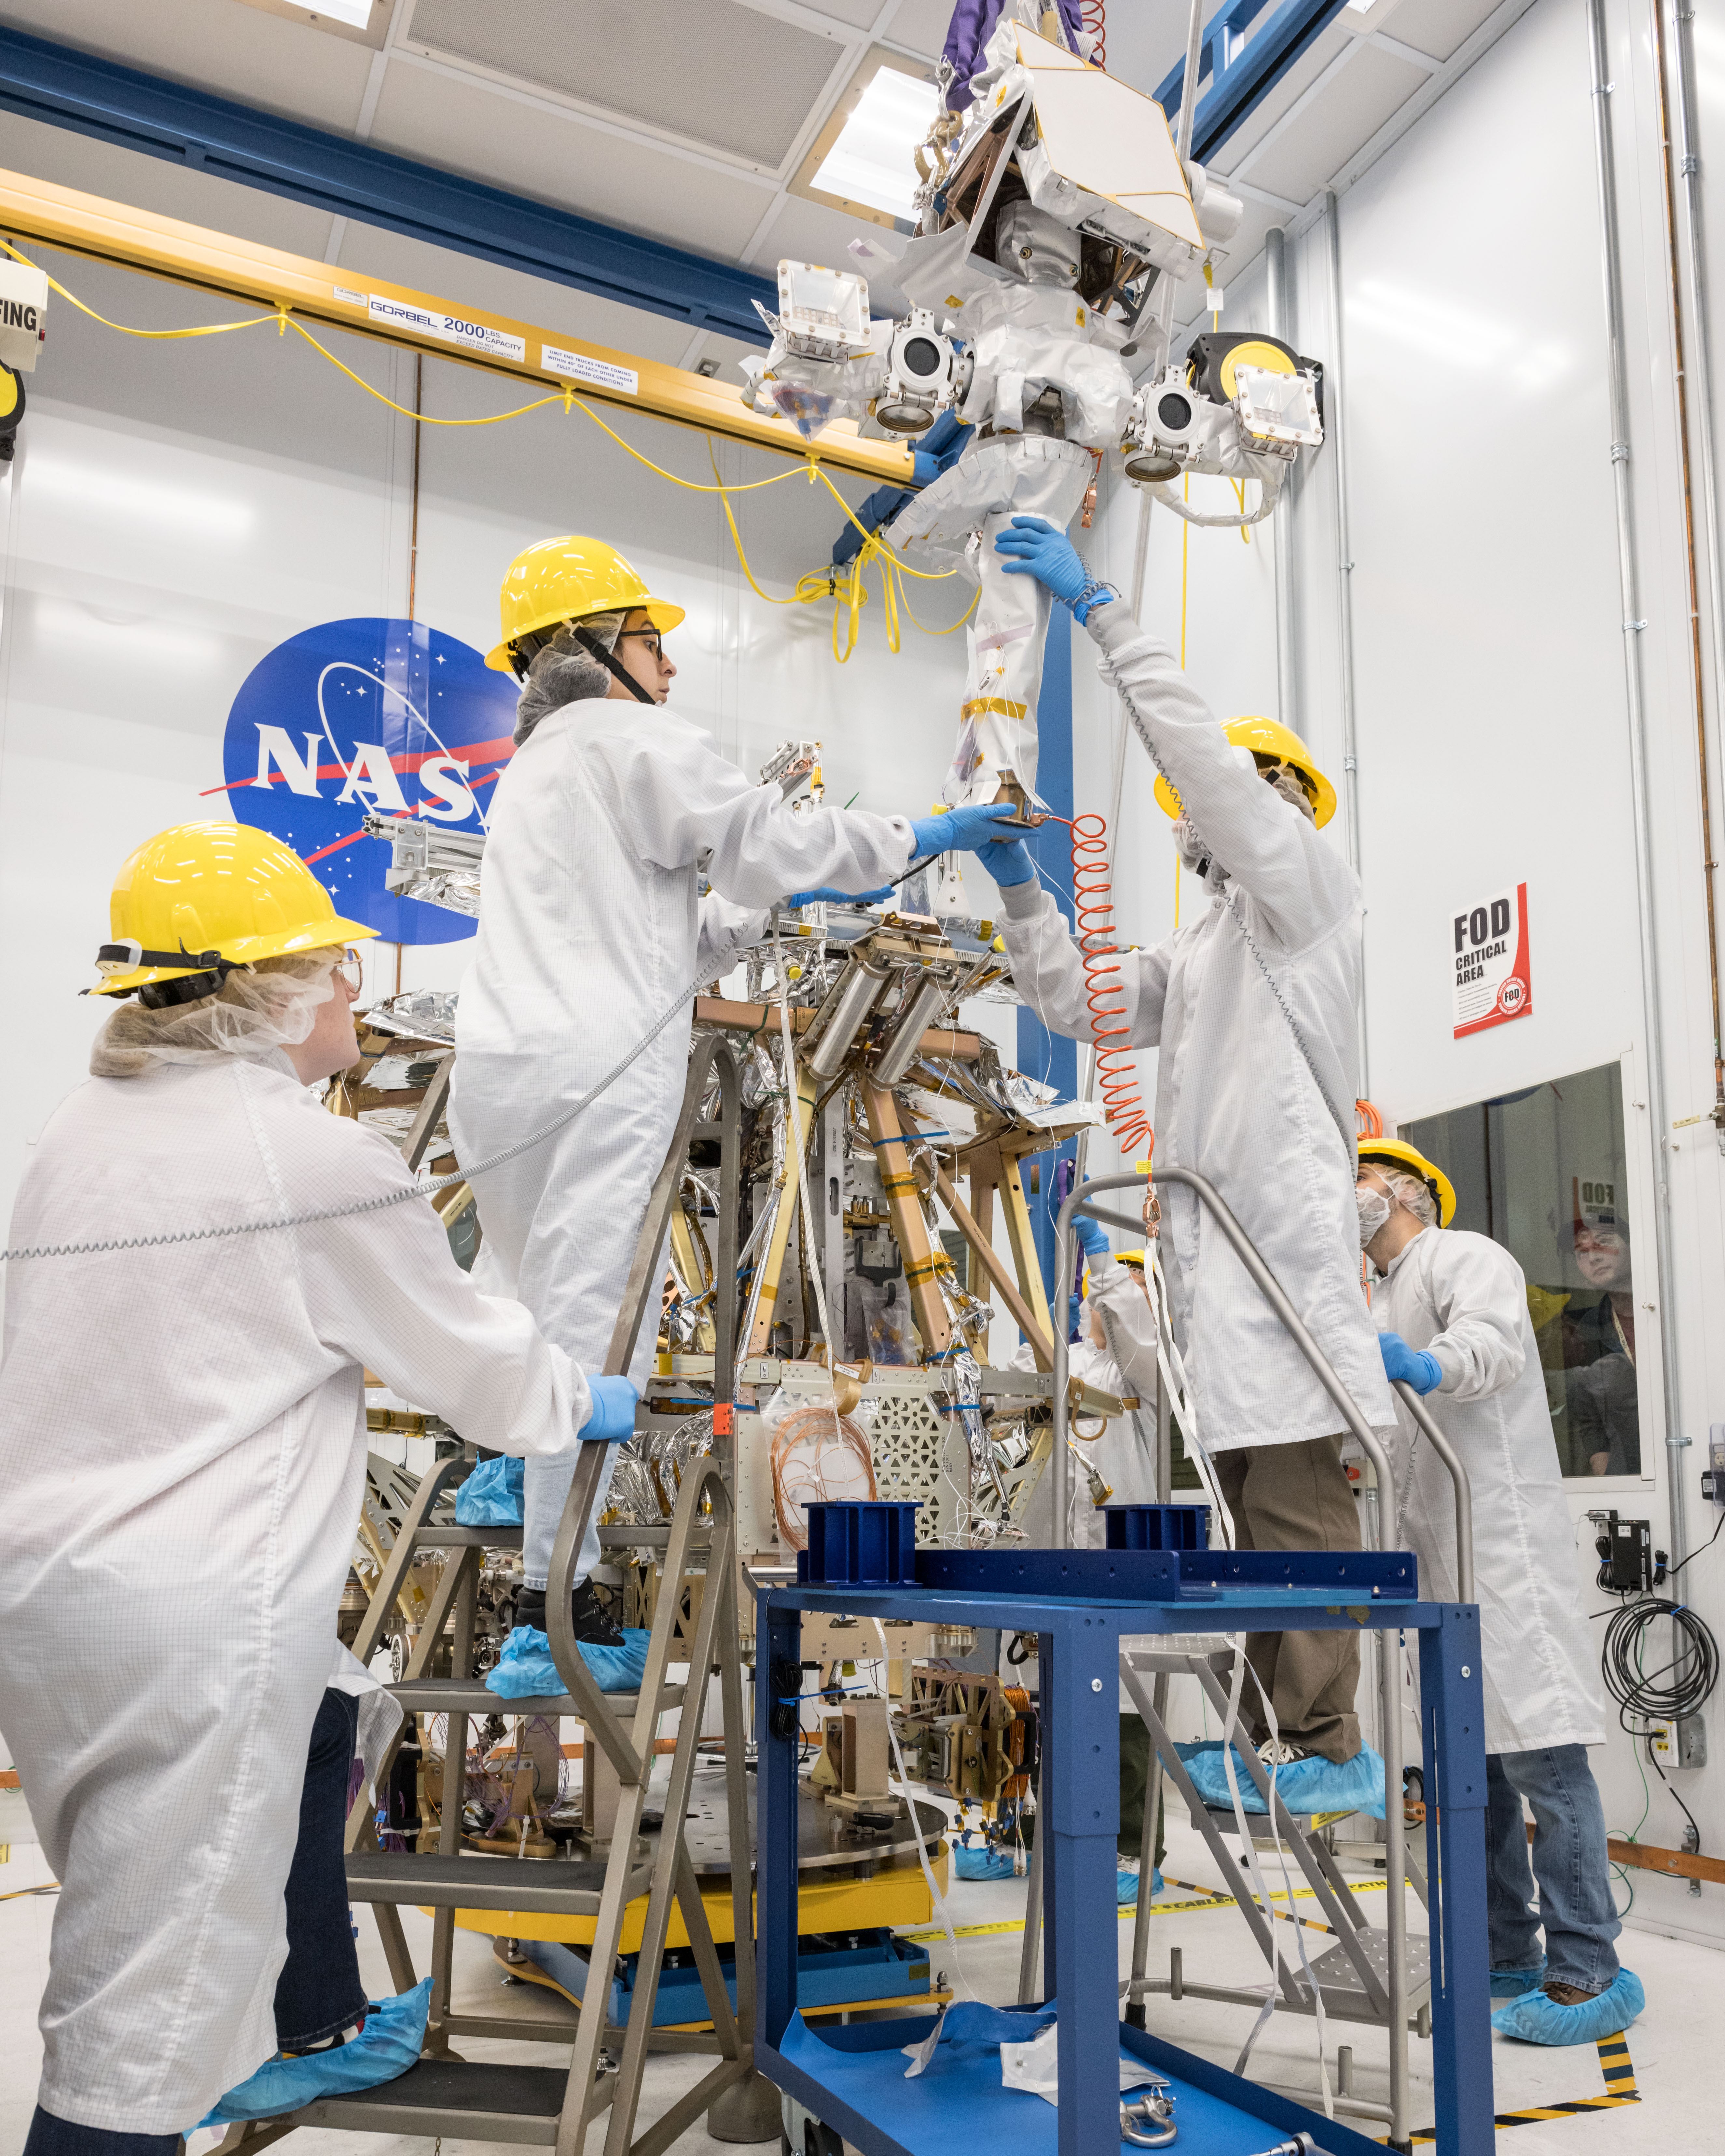 Four engineers in white lab coats, yellow hard hats, and blue gloves and shoe covers surround a metal rover. Two engineers stand on stepladders as they fit a mast with attached instruments onto the rover.